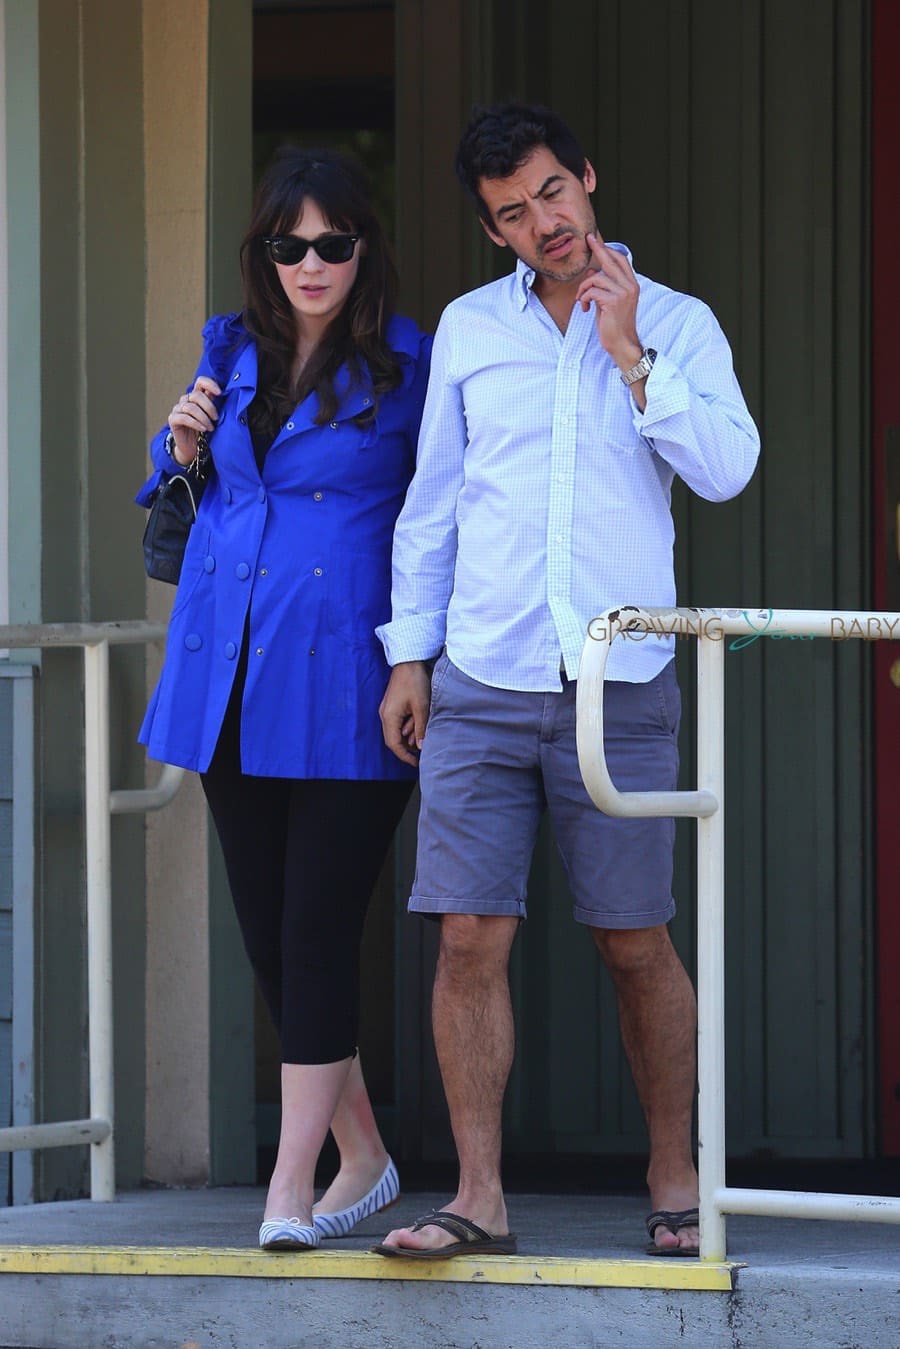 A Pregnant Zooey Deschanel Lunches With Friends in LA